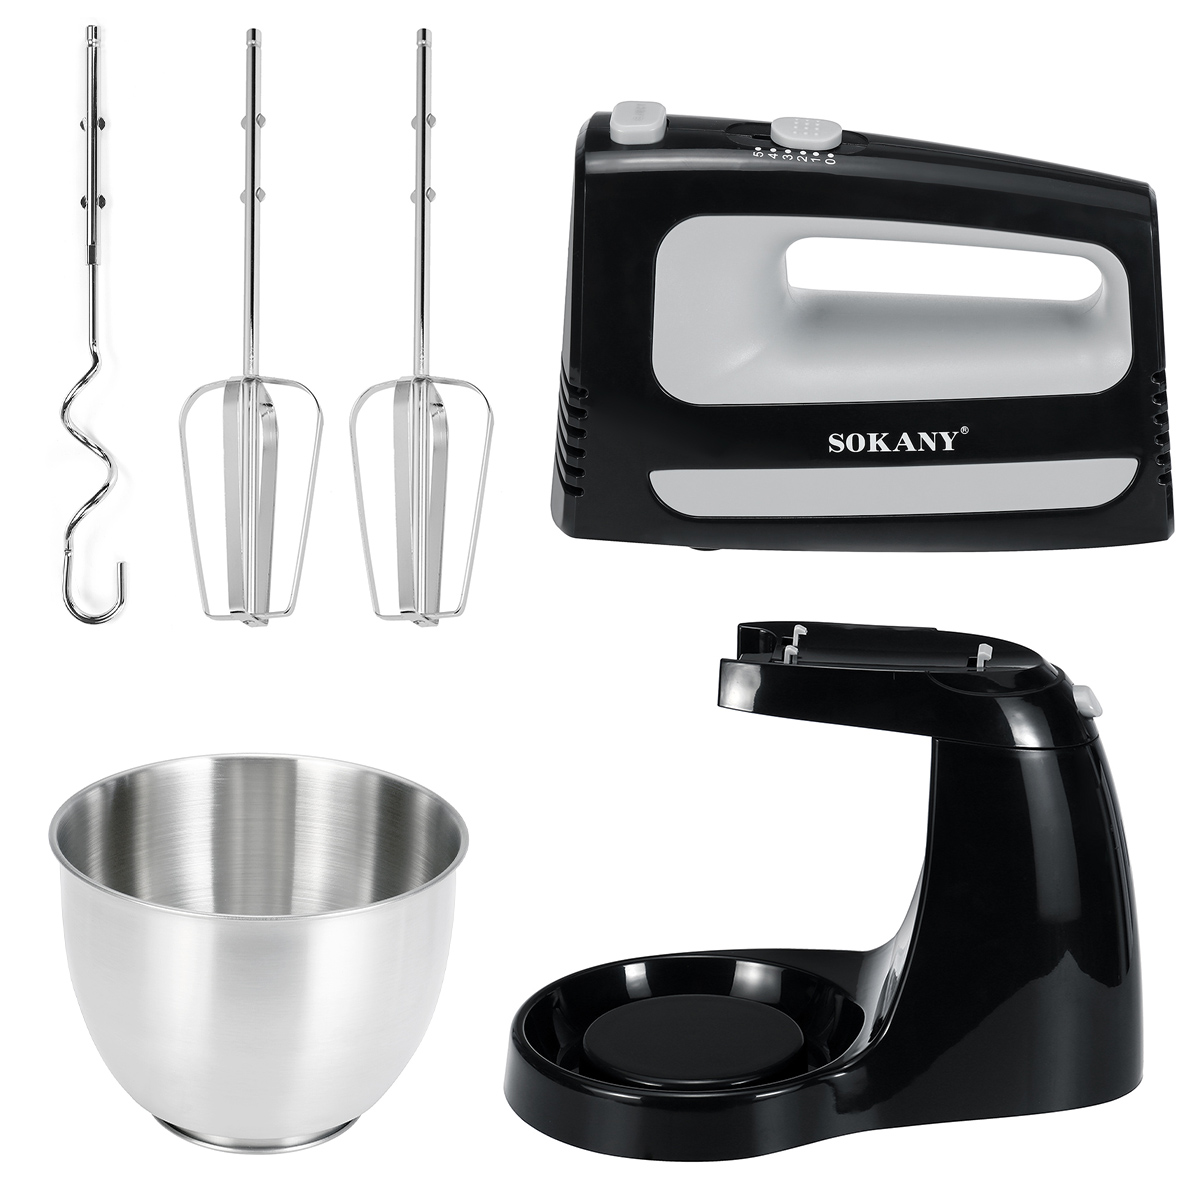 SOKANY-Stainless-Steel-Electric-Cake-Mixer-5-speed-Adjustment-Compact-Portable-Food-Beater-1916486-8